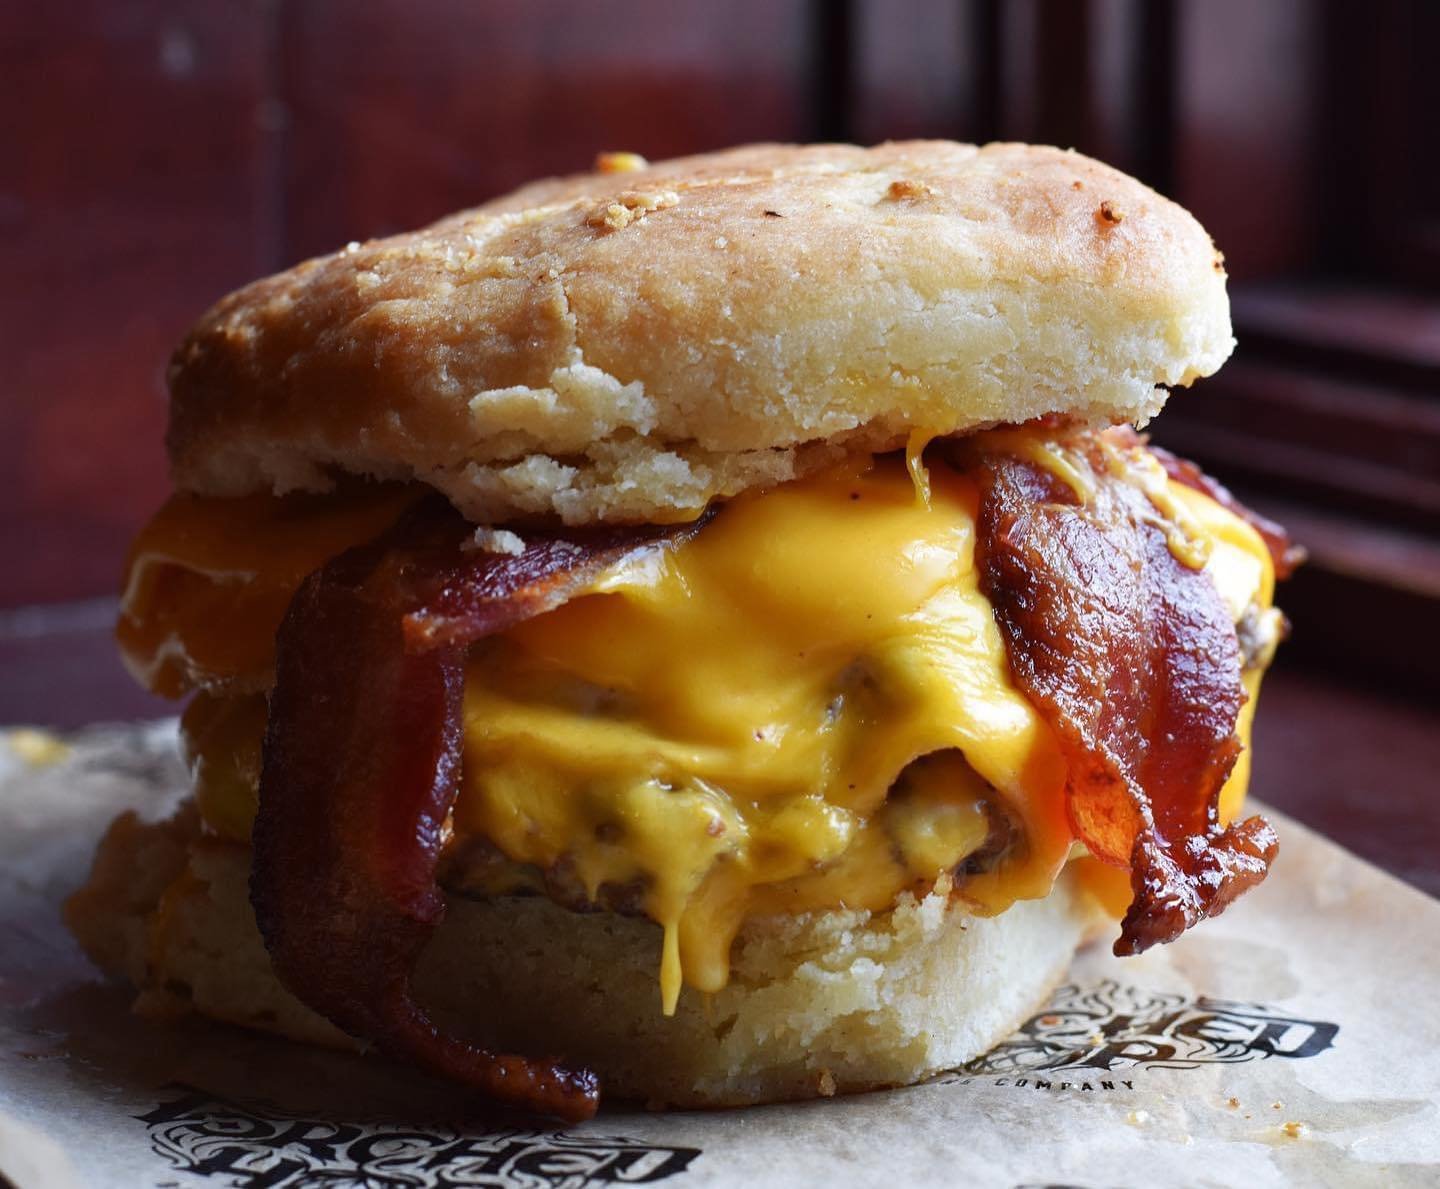 What do you get when you combine breakfast, dinner and Burger Monday together? 

The Brinner Burger. House made Biscuit, Double Patties with American Cheese, Fried Egg and Bacon. Served with a side of Strawberry Preserves.